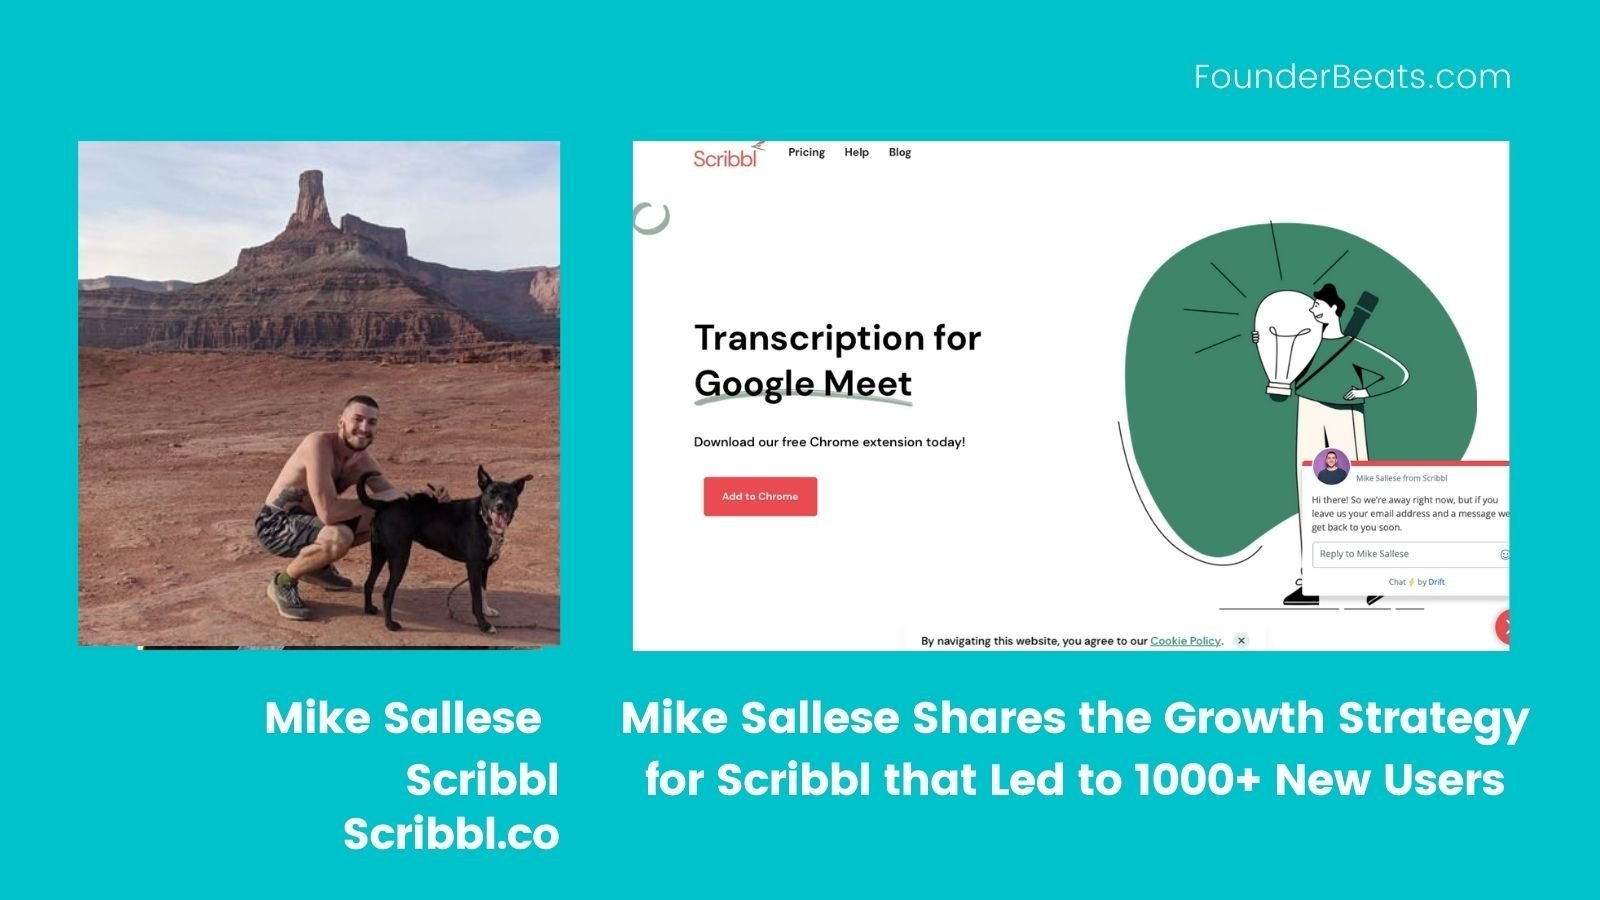 Mike Sallese Shares the Growth Strategy for Scribbl that Led to 1000+ New Users